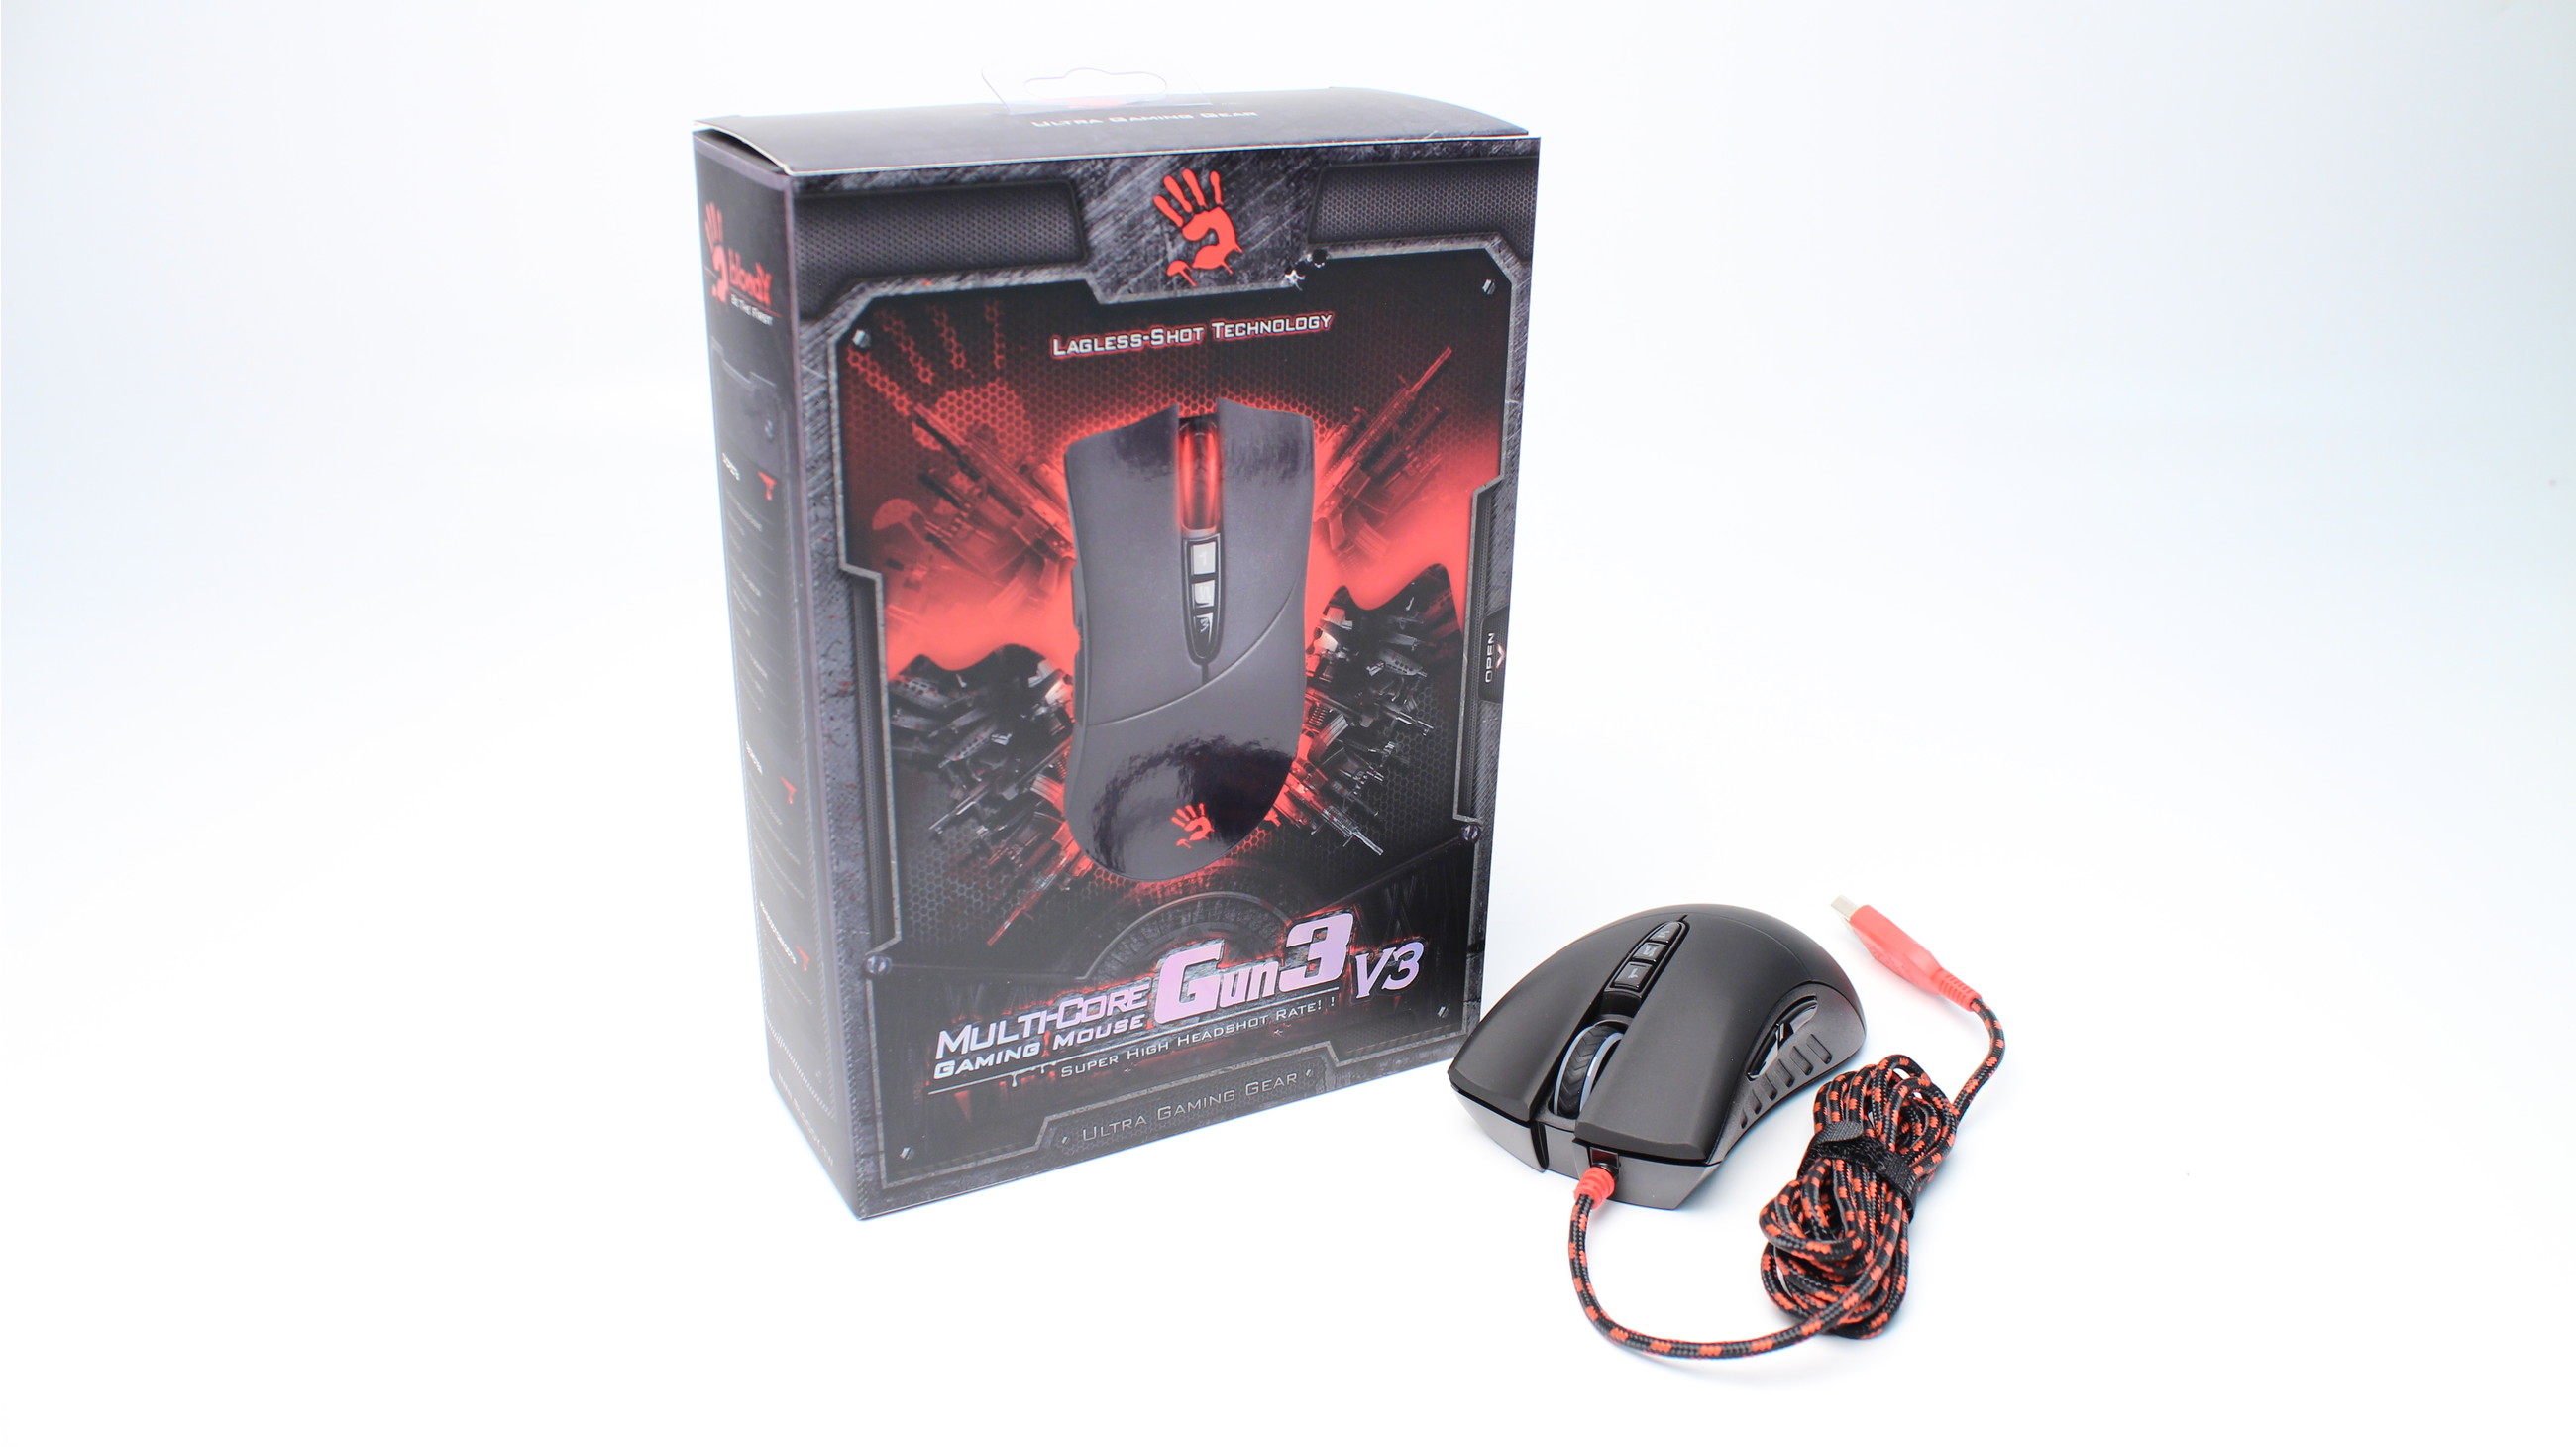 Blacklisted device bloody mouse. Bloody gun3 v3. Мышка Bloody gun3. Gun 3 мышь. A4tech Bloody v3.